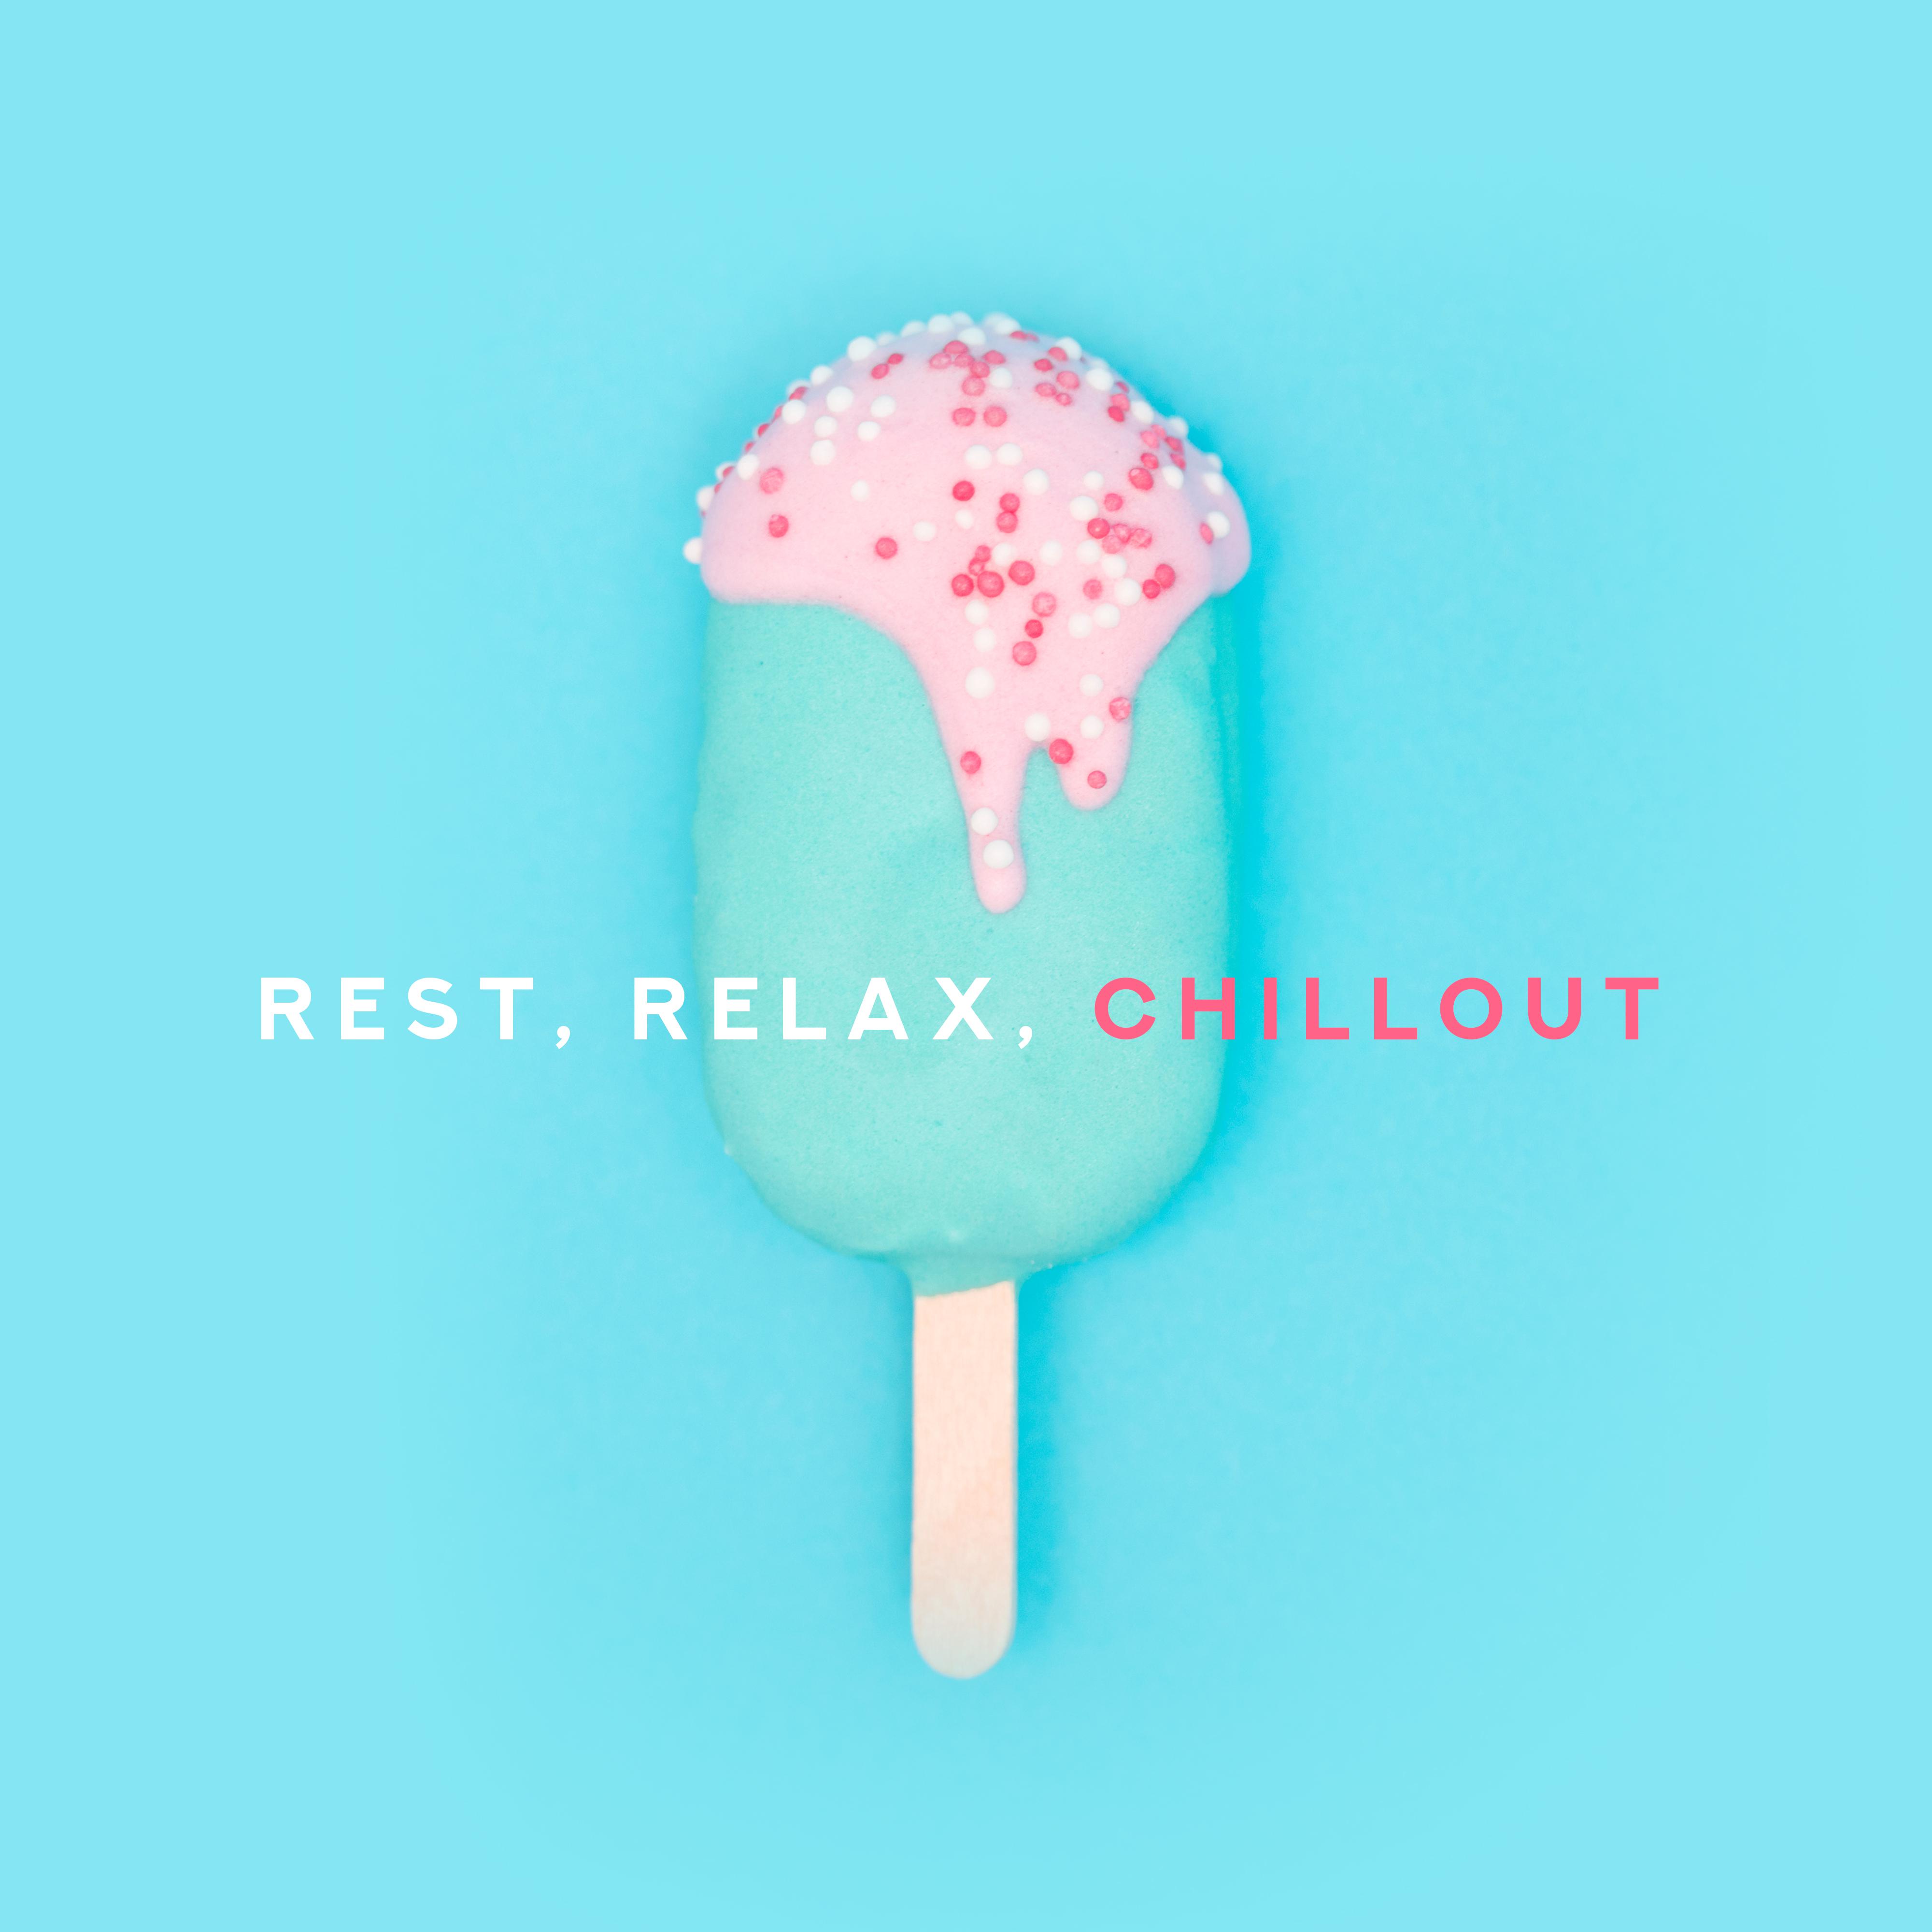 Rest, Relax, Chillout: 2019 Top Chill Out Music Selection, Perfect Mix for Vacation Relaxing, Electronic Calming Down Vibes, Tropical Holidays Beats